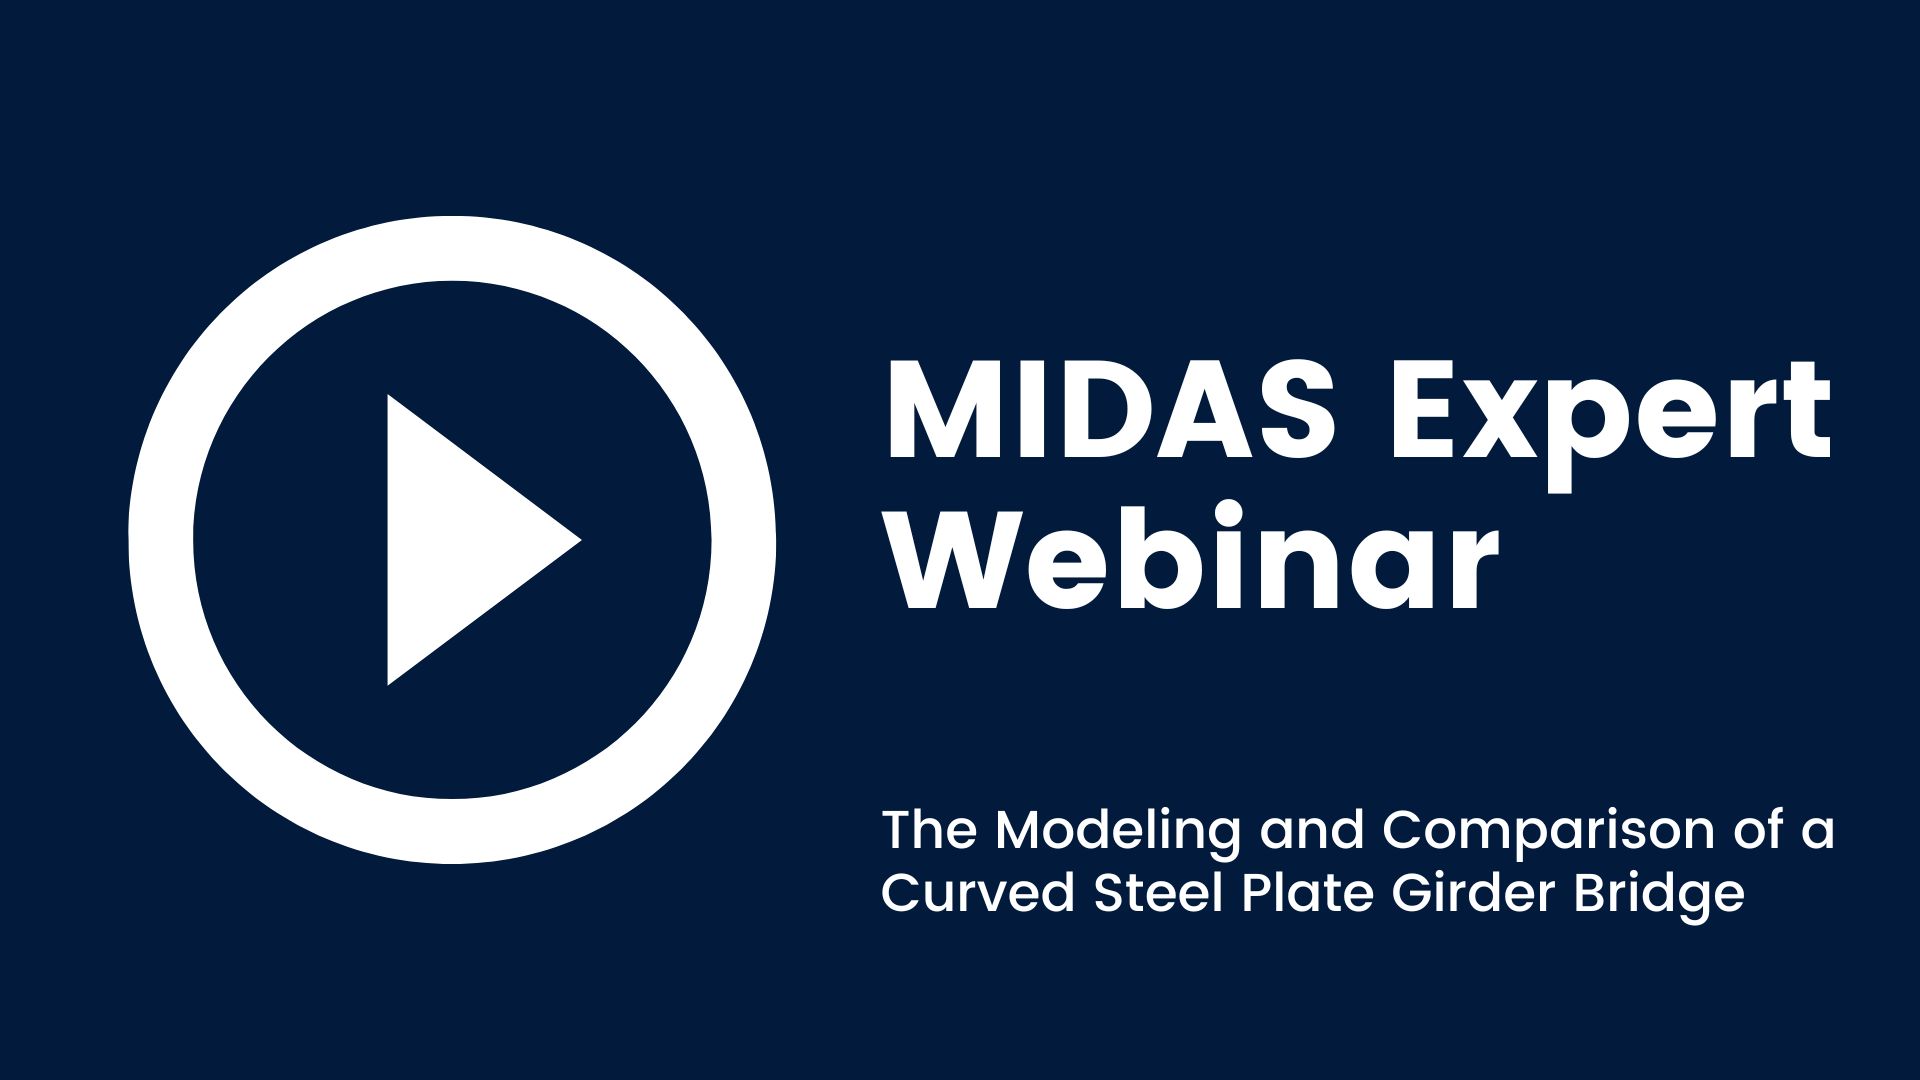 Webinar: The Modeling and Comparison of a Curved Steel Plate Girder Bridge